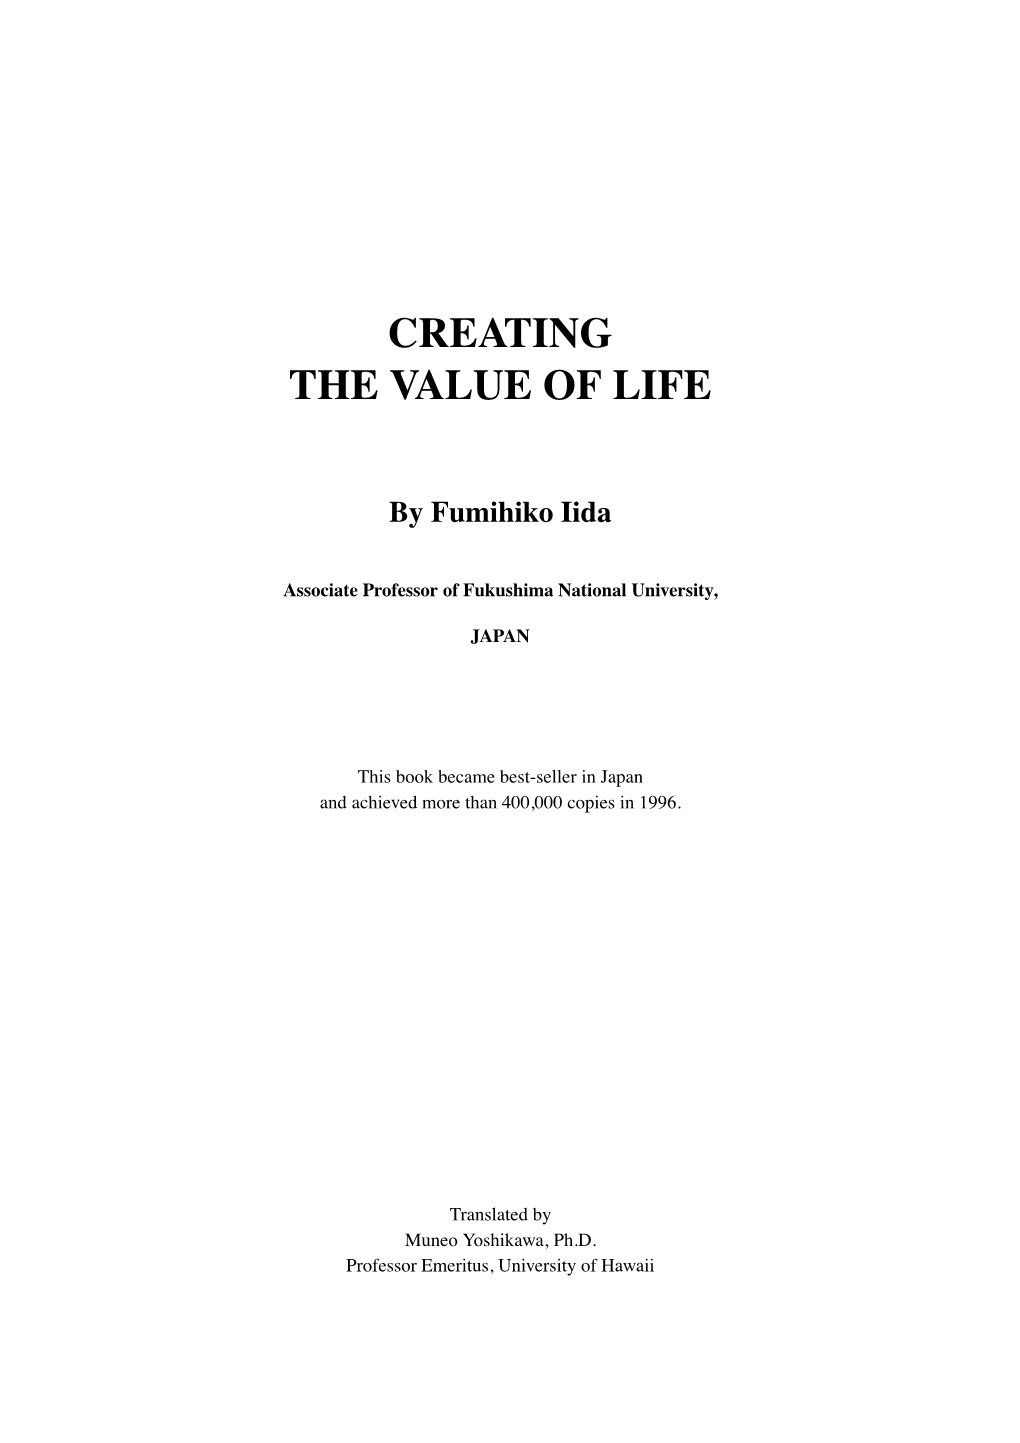 Creating the Value of Life